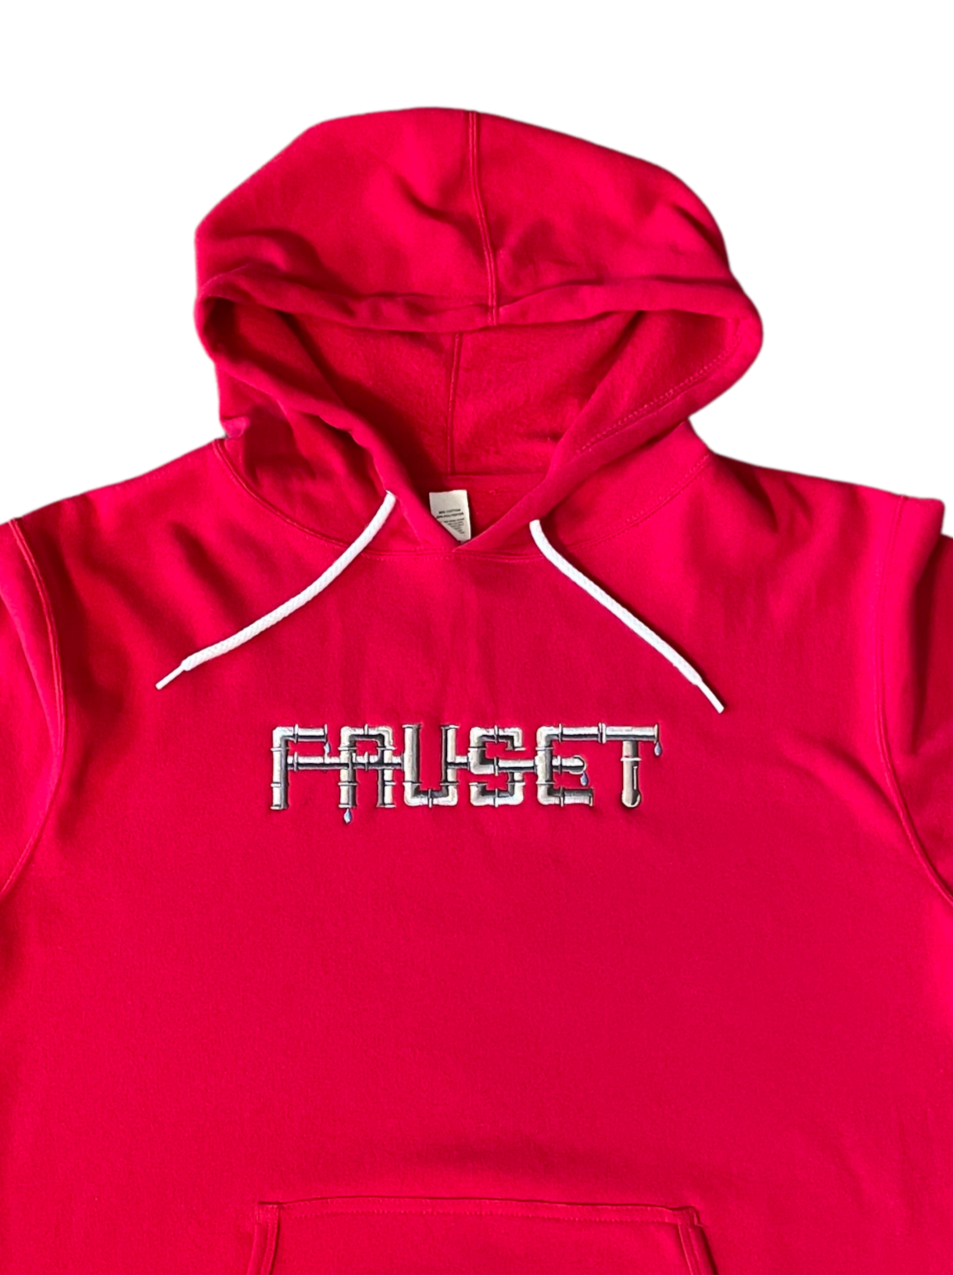 Fauset Pipes Hoodie